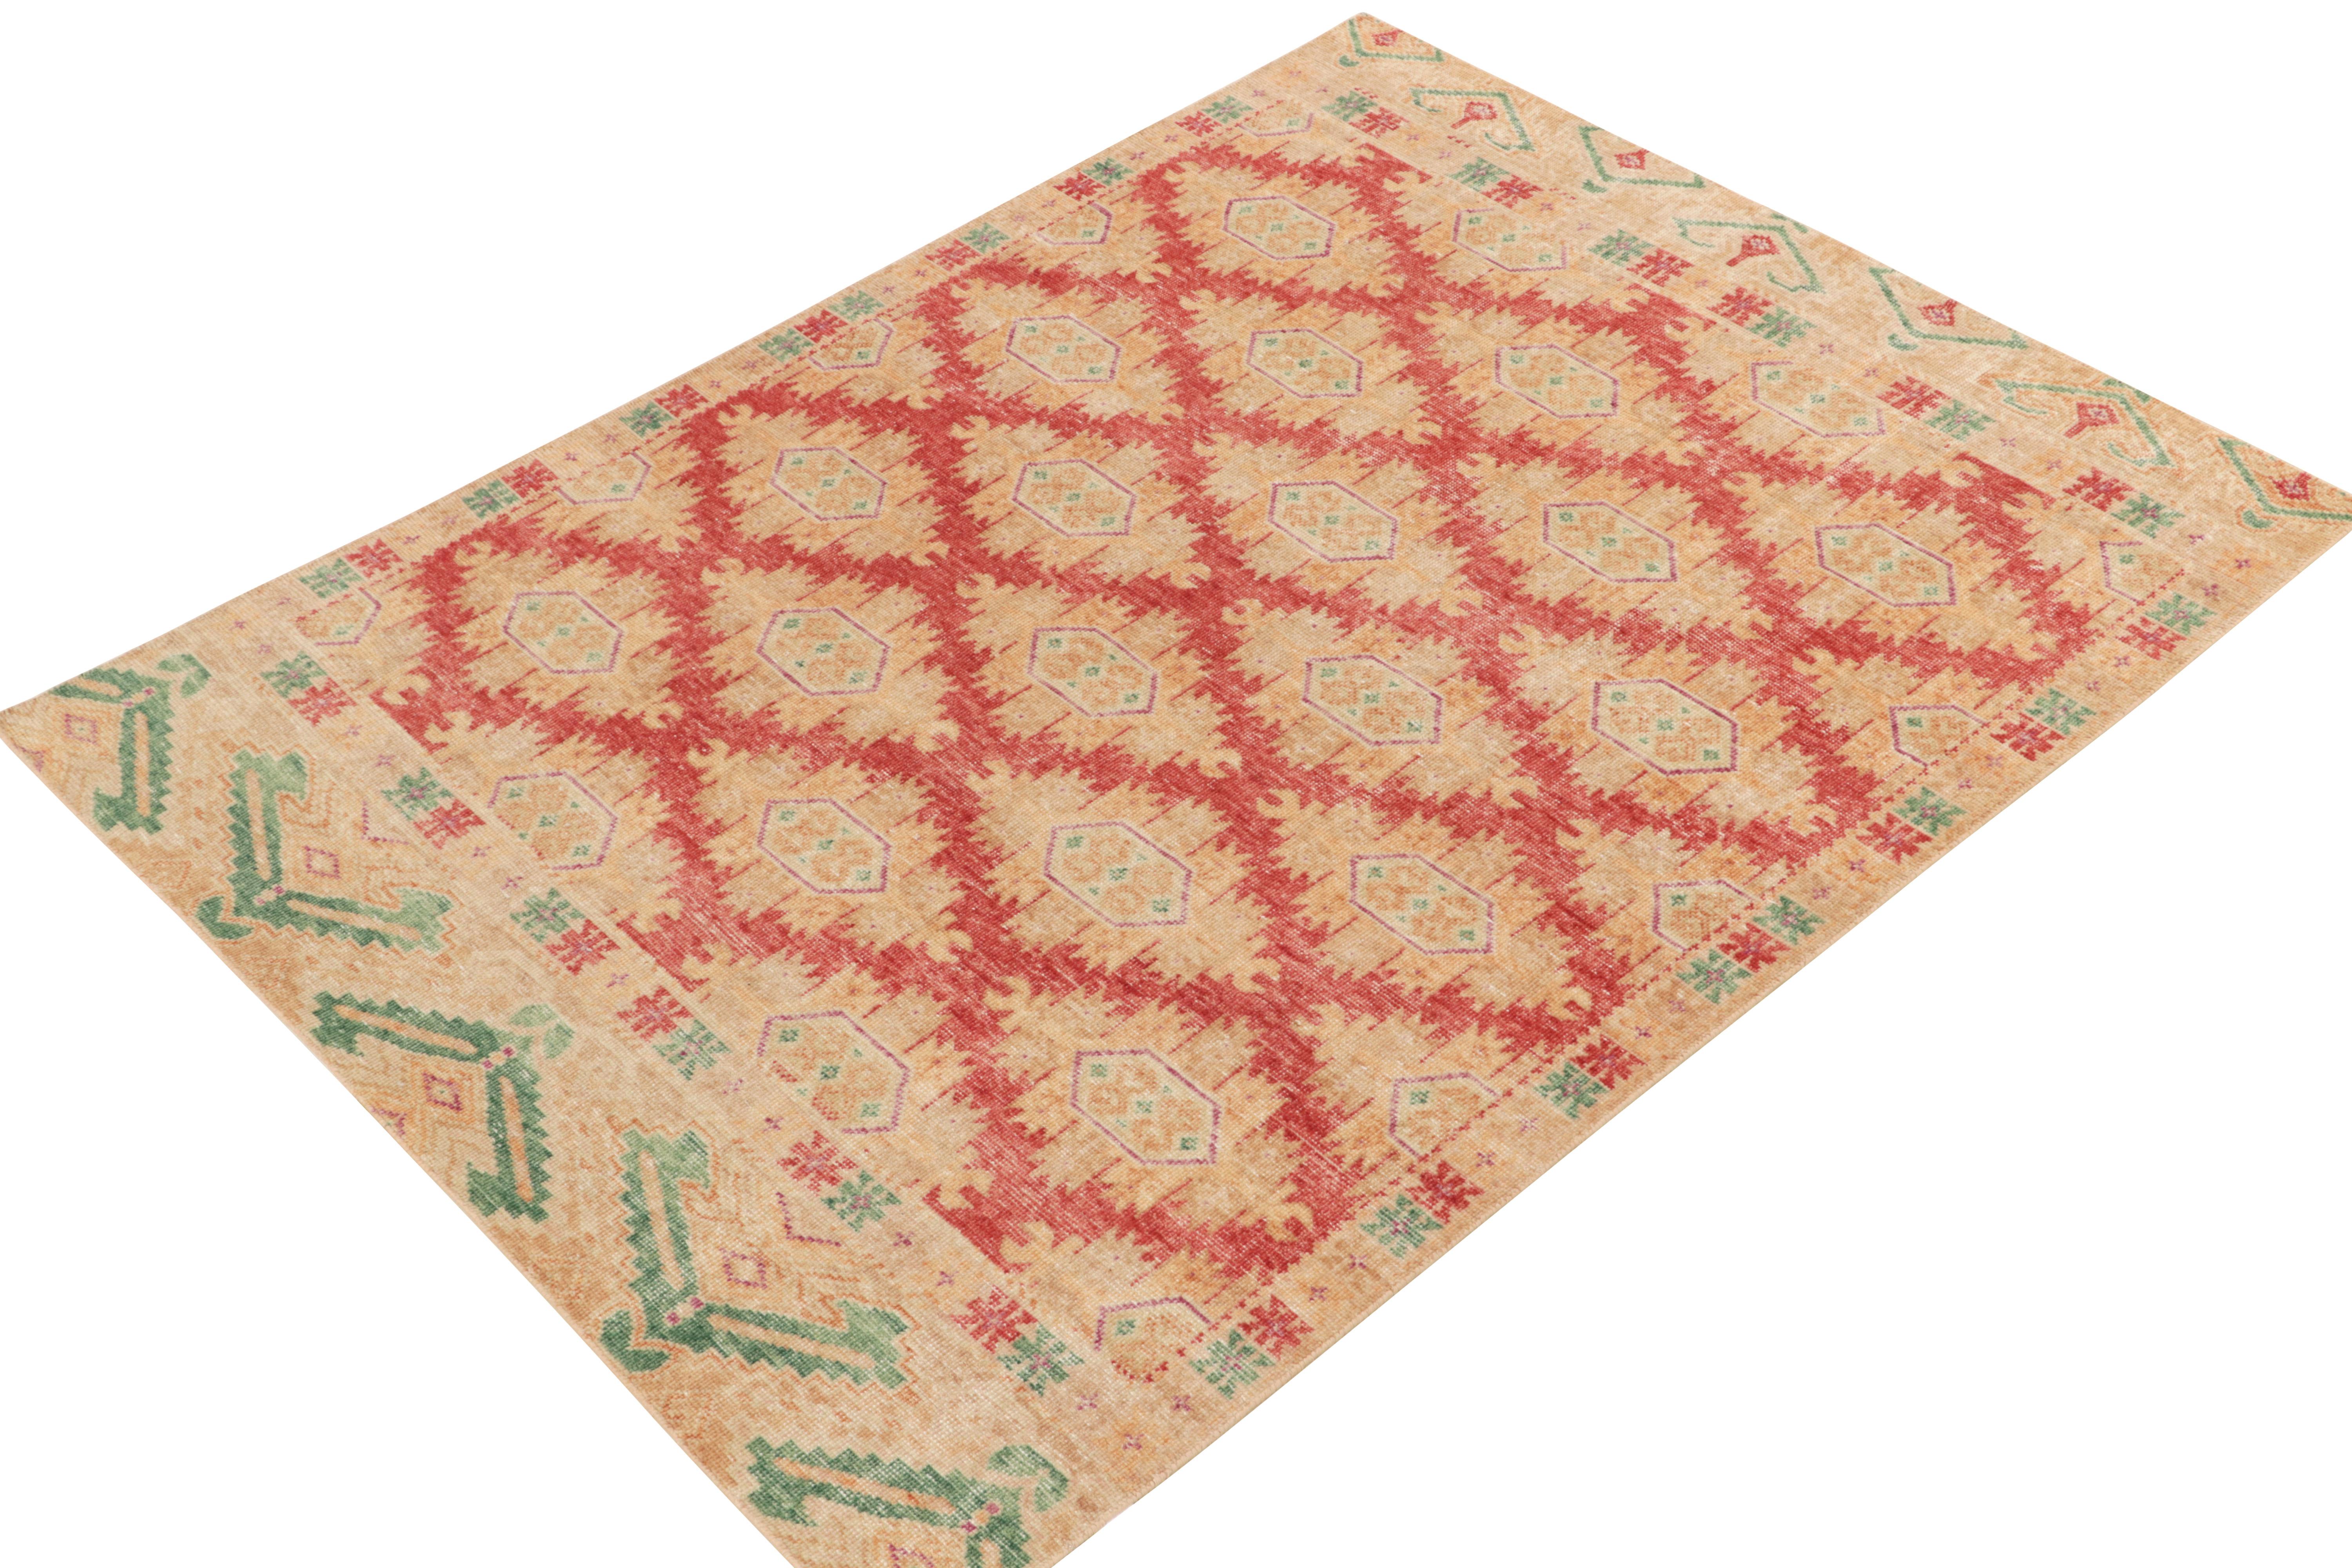 Tribal Rug & Kilim's Distressed Style Rug in Red, Gold, Green Geometric Pattern For Sale